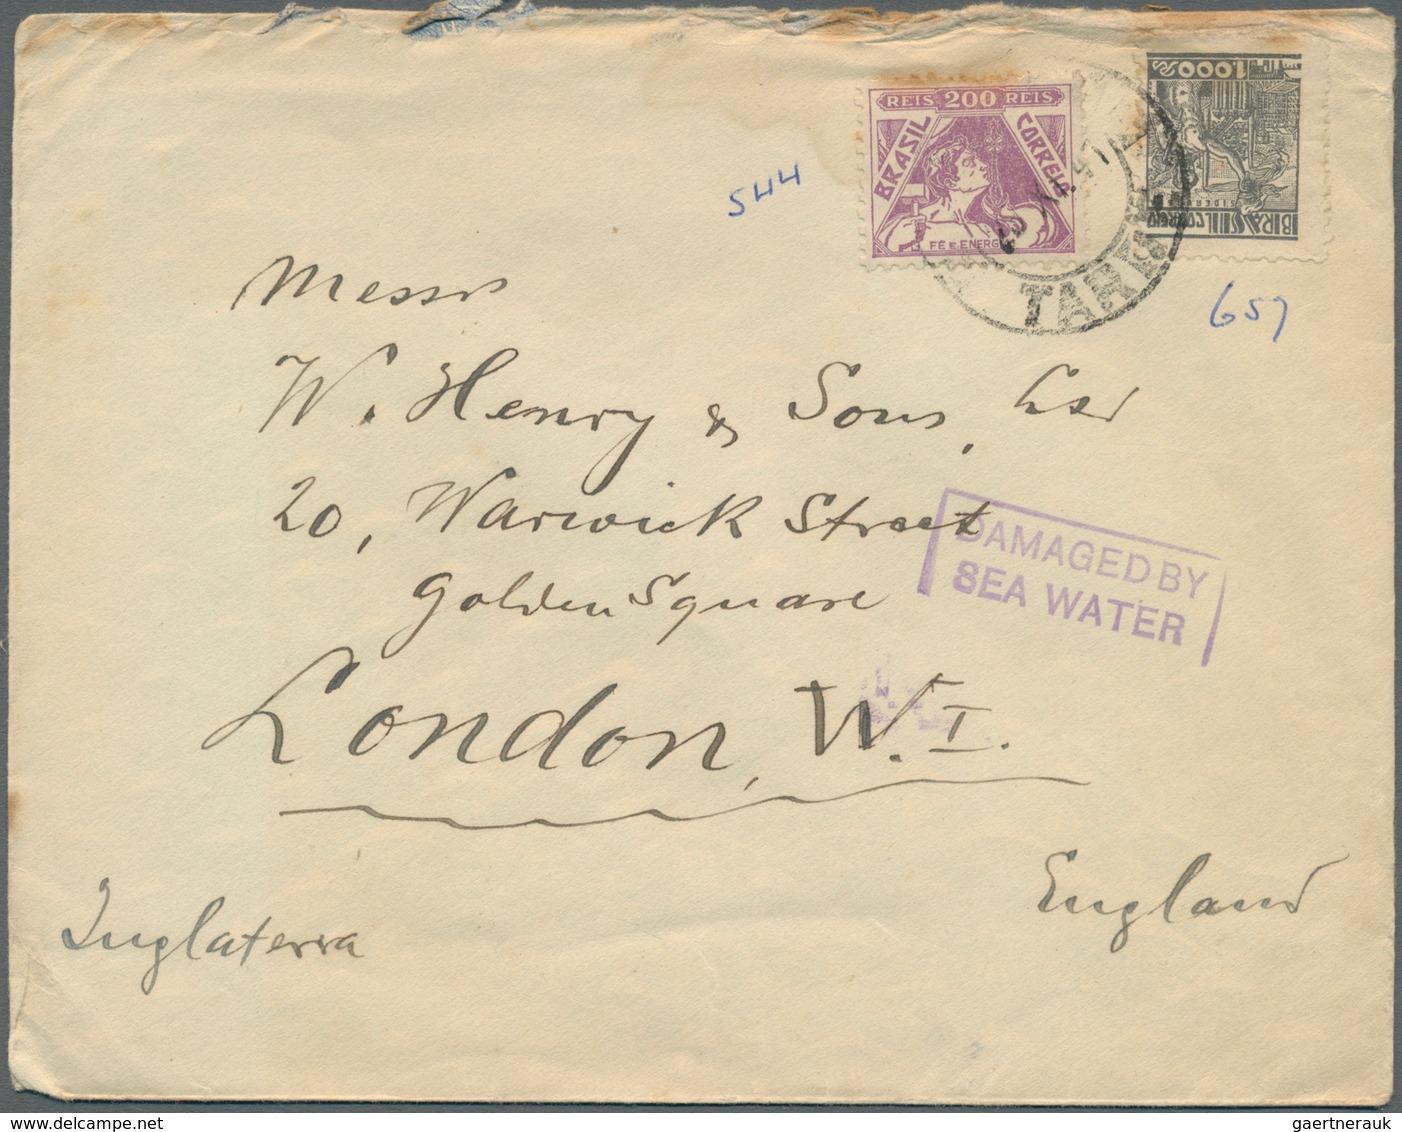 24585 Übersee: 1893/1994: 40 better covers and postal stationeries including postage dues, censored mail o